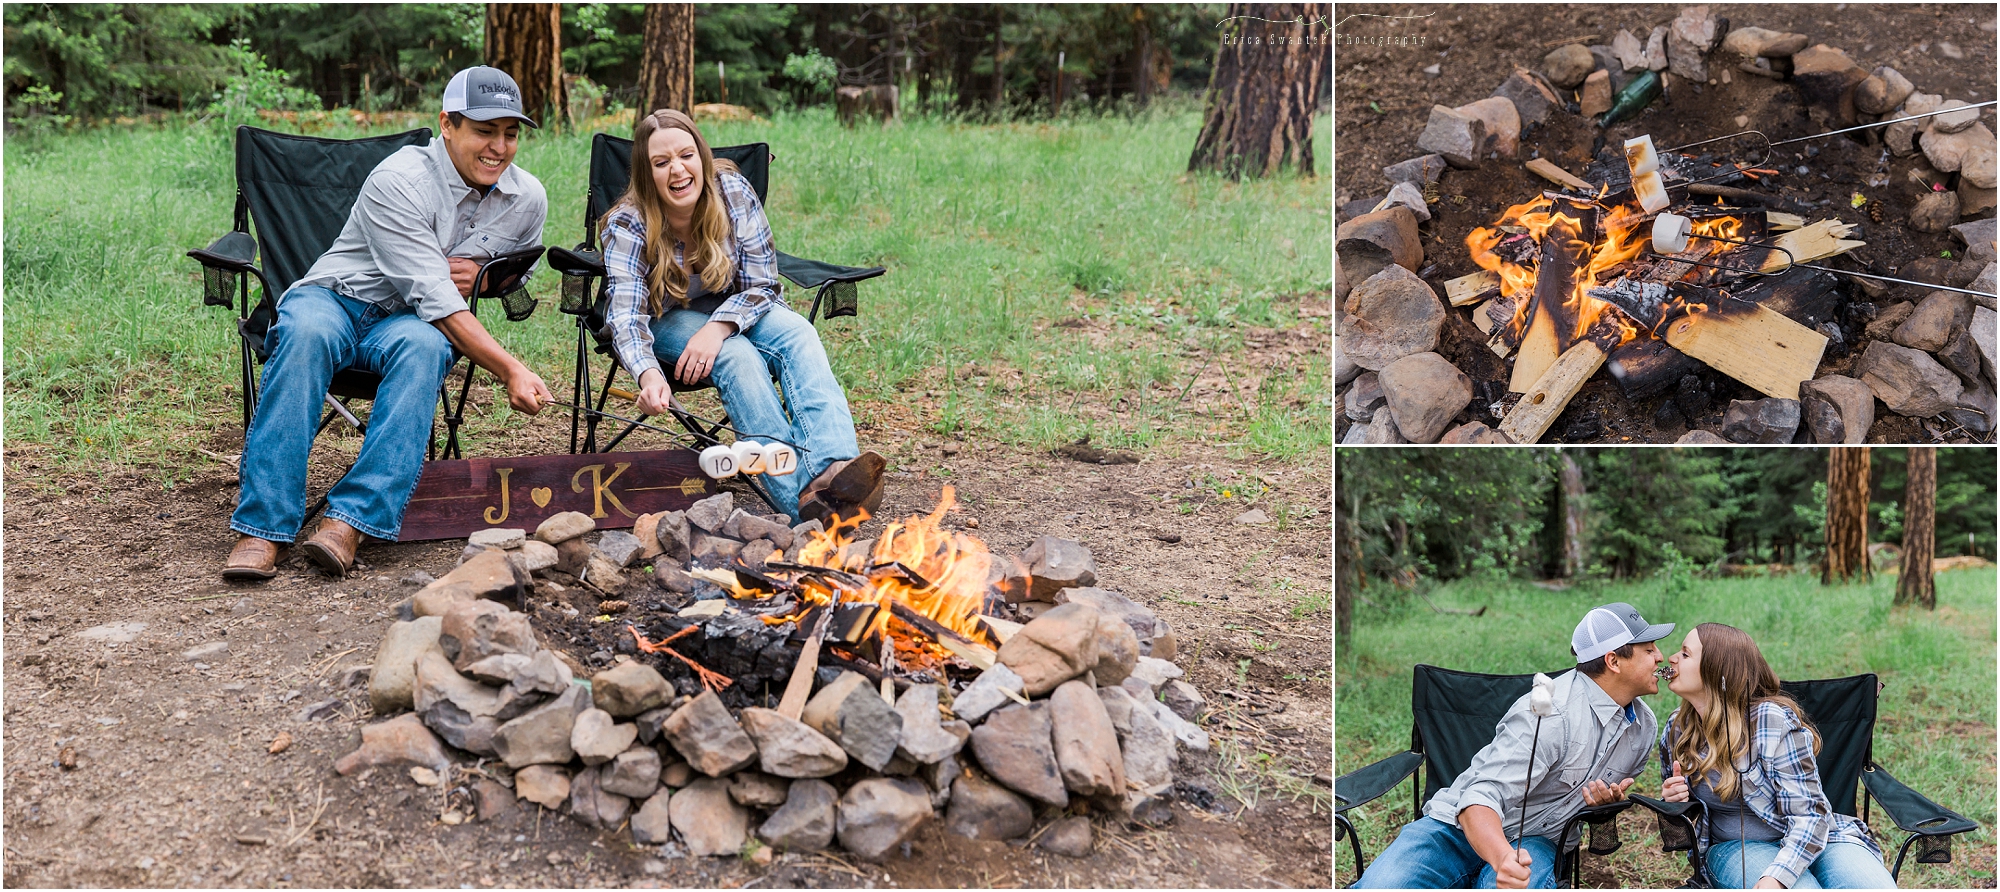 Roasting marshmallows over the campfire at this Oregon outdoor adventure engagement session near Bend. | Erica Swantek Photography